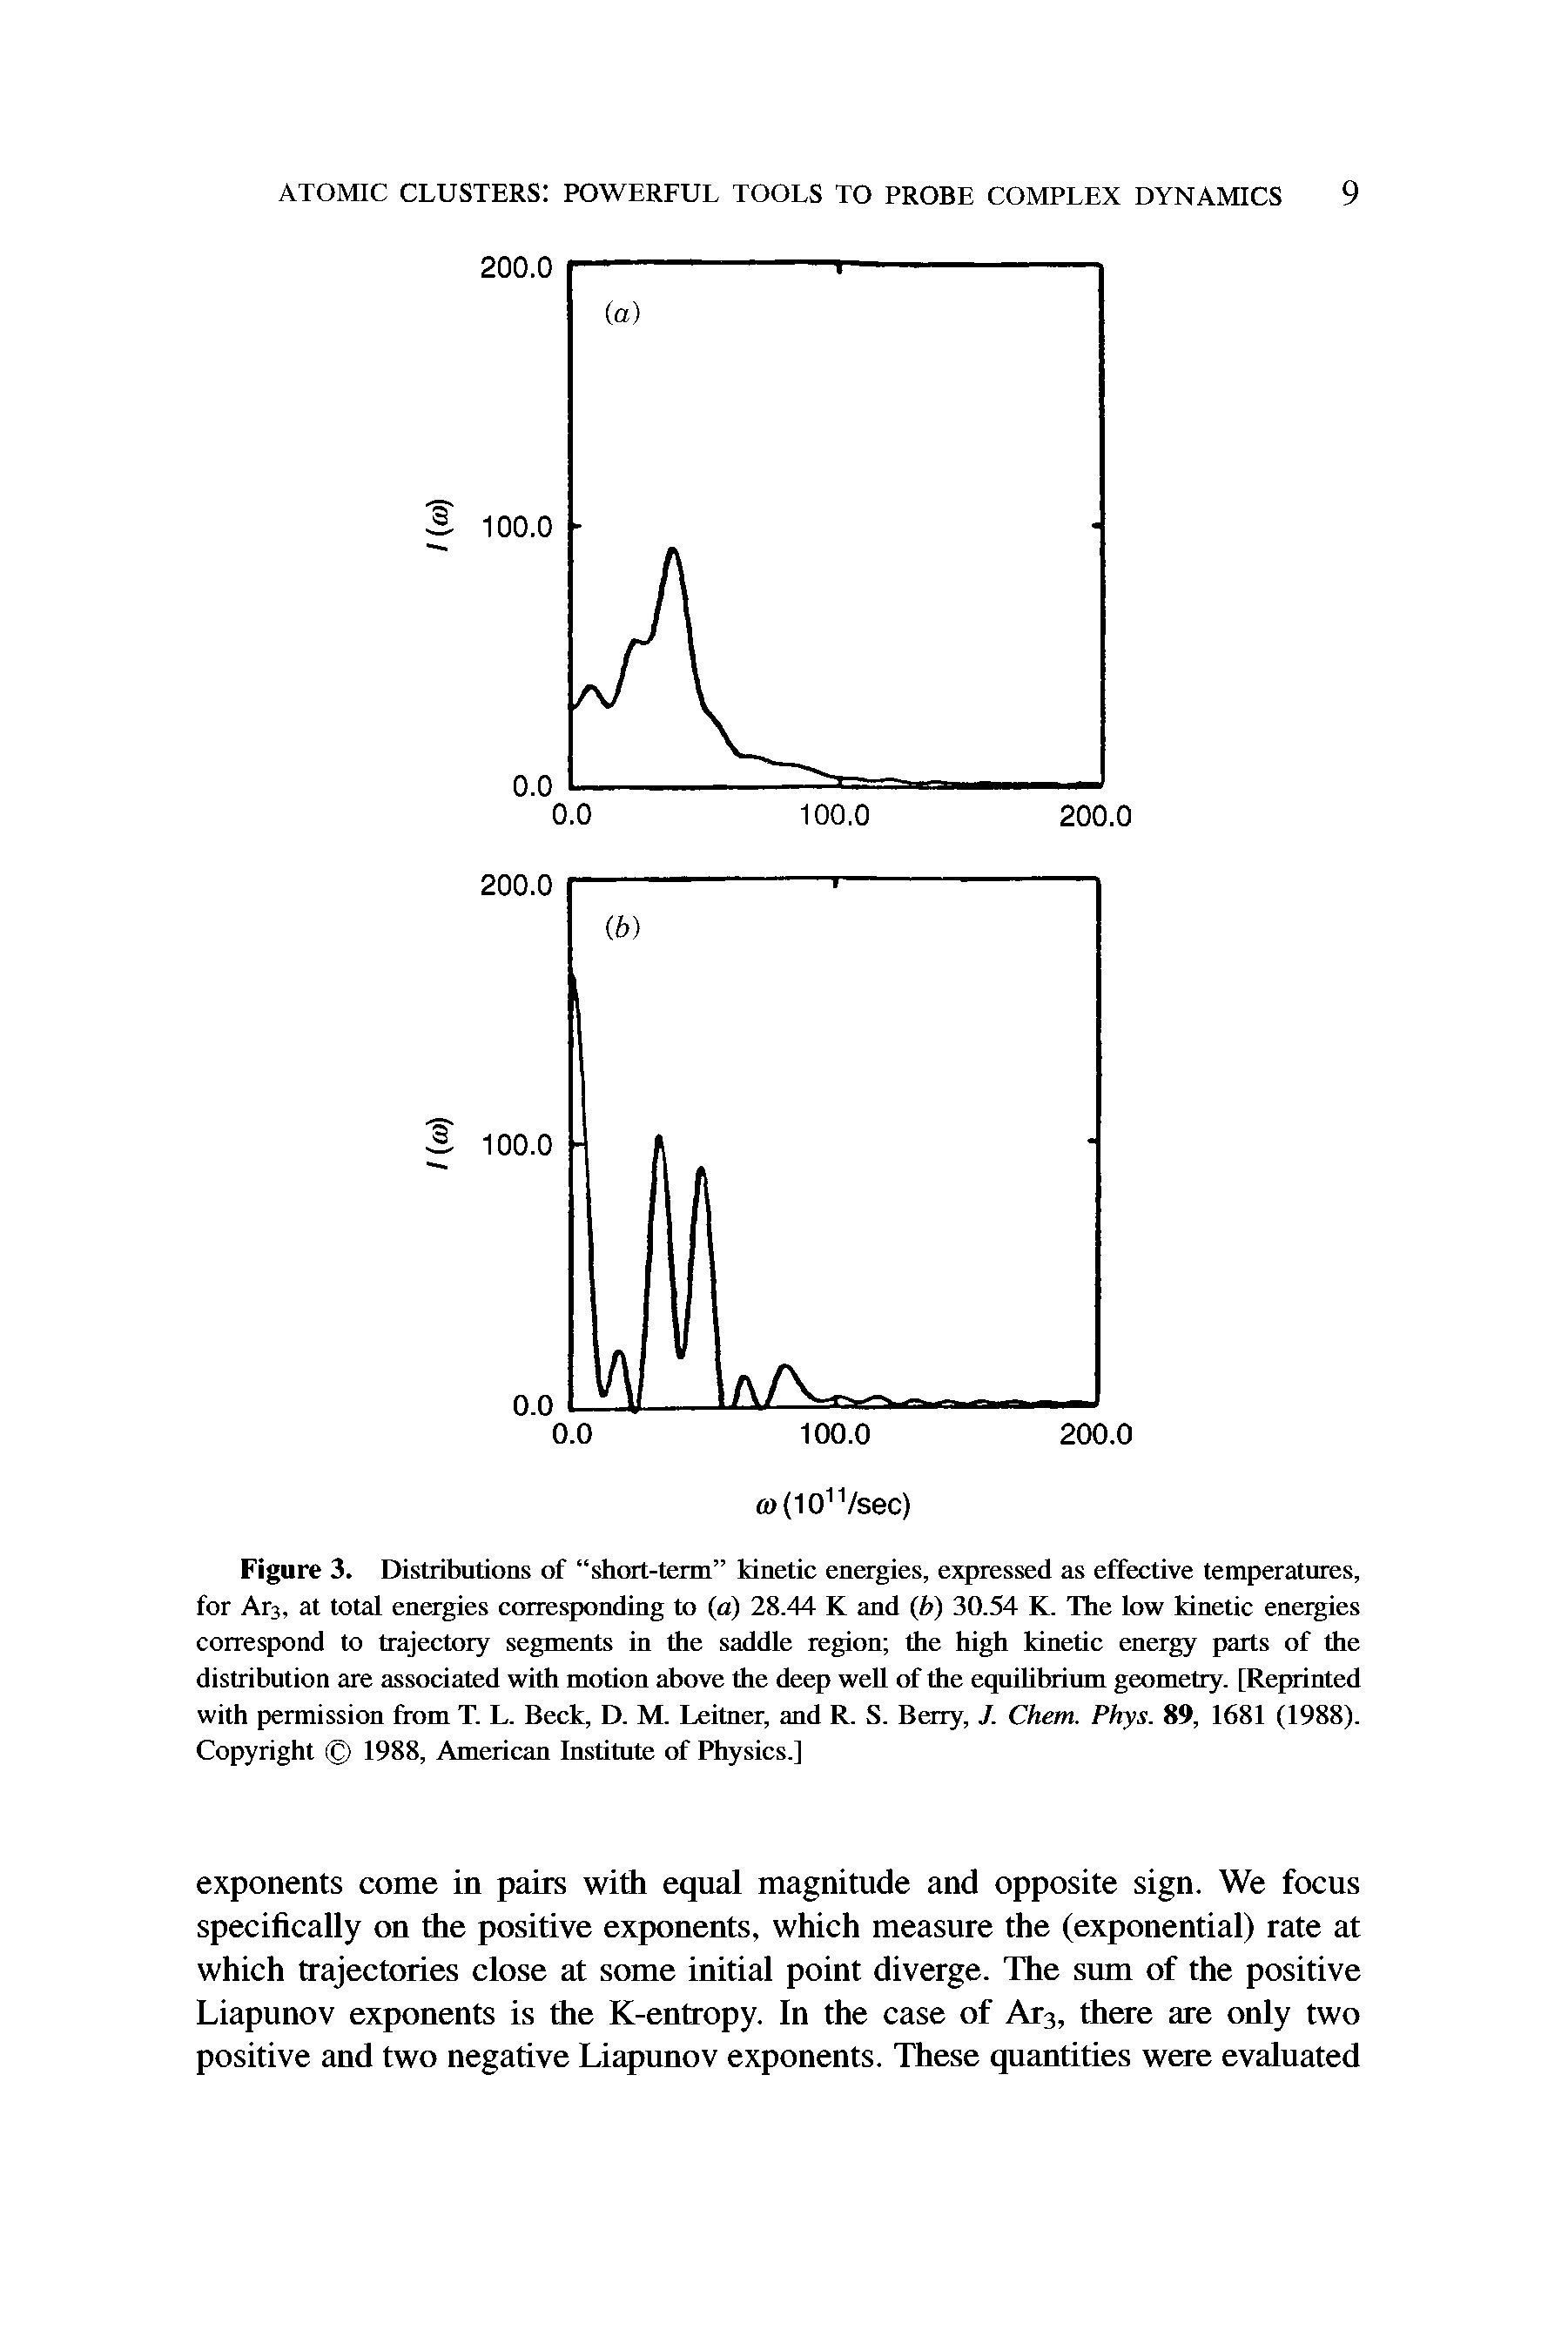 Figure 3. Distributions of short-term kinetic energies, expressed as effective temperatures, for Ar3, at total energies corresponding to (a) 28.44 K and (b) 30.54 K. The low kinetic energies correspond to trajectory segments in the saddle region the high kinetic energy parts of the distribution are associated with motion above the deep well of the equilibrium geometry. [Reprinted with permission from T. L. Beck, D. M. Leitner, and R. S. Berry, J. Chem. Phys. 89, 1681 (1988). Copyright 1988, American Institute of Physics.]...